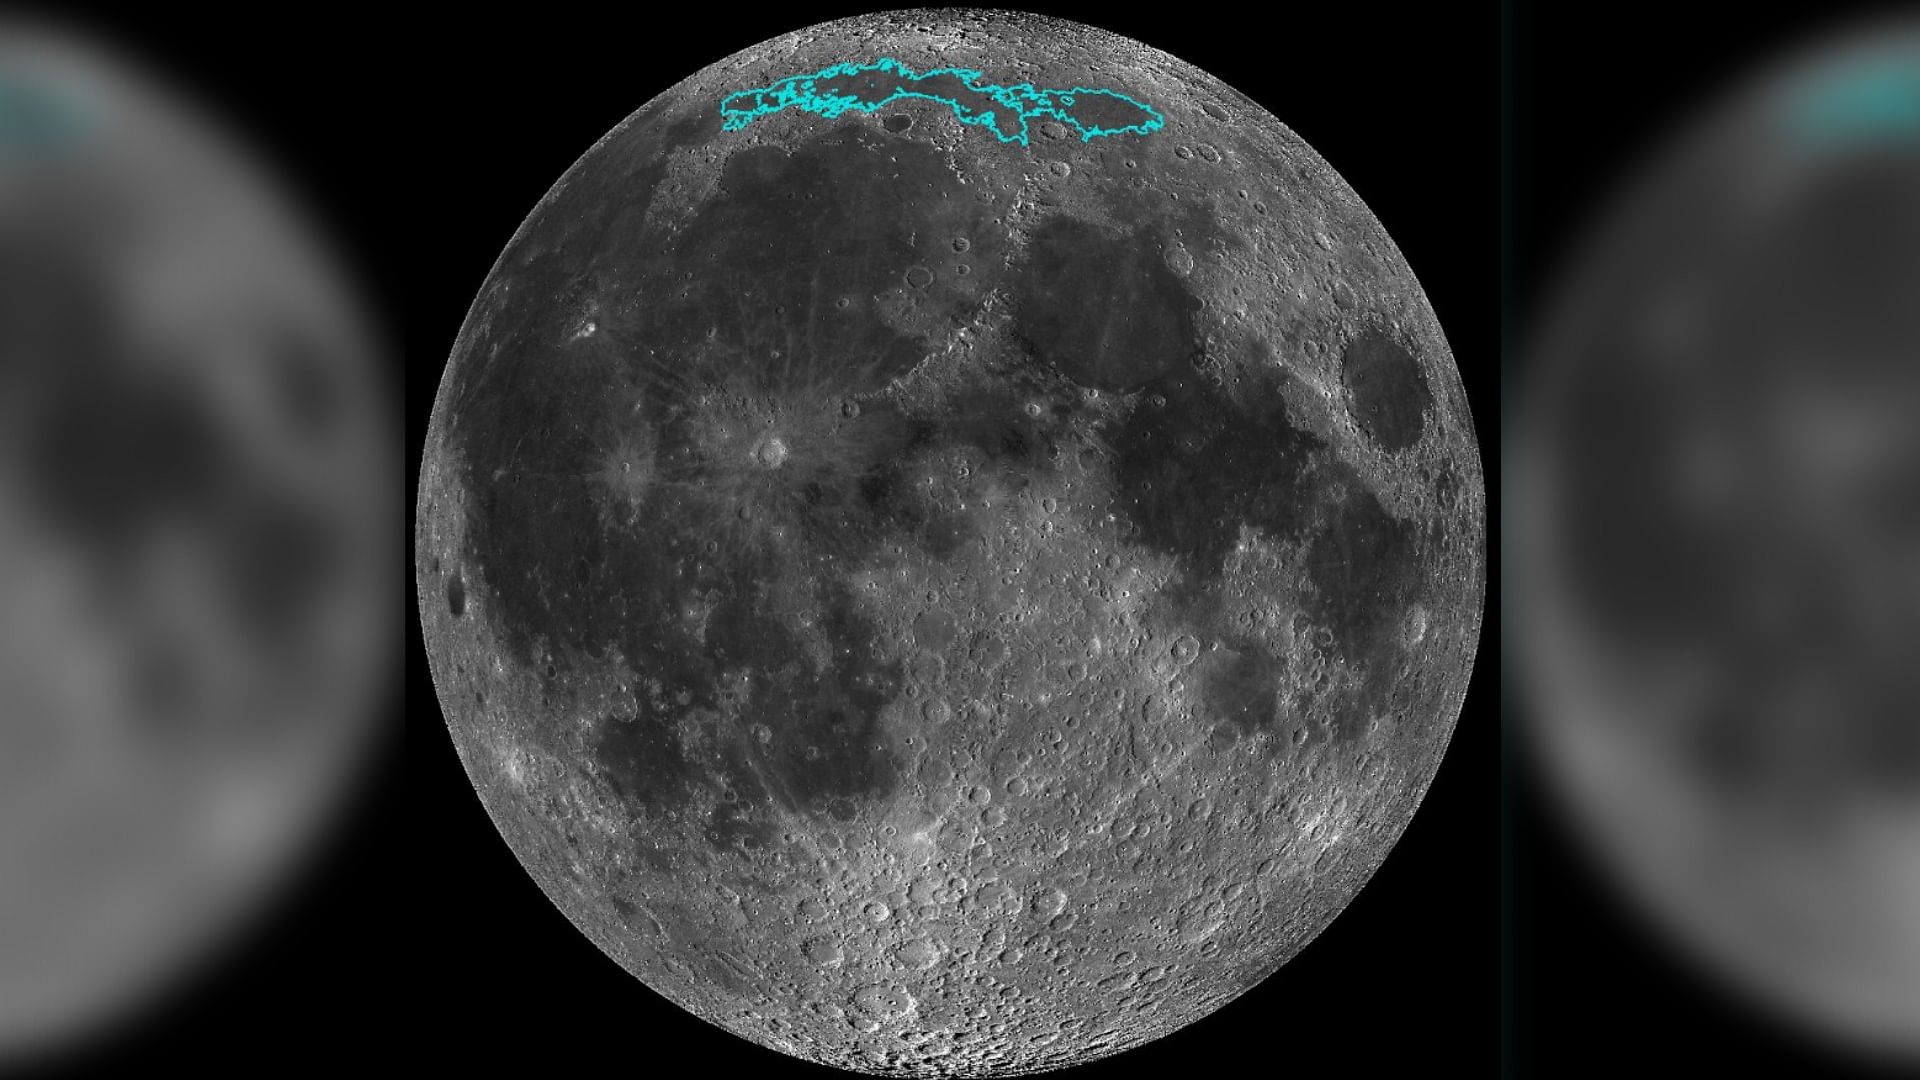 After billions of years of cooling, the Moon continues to shrink. 